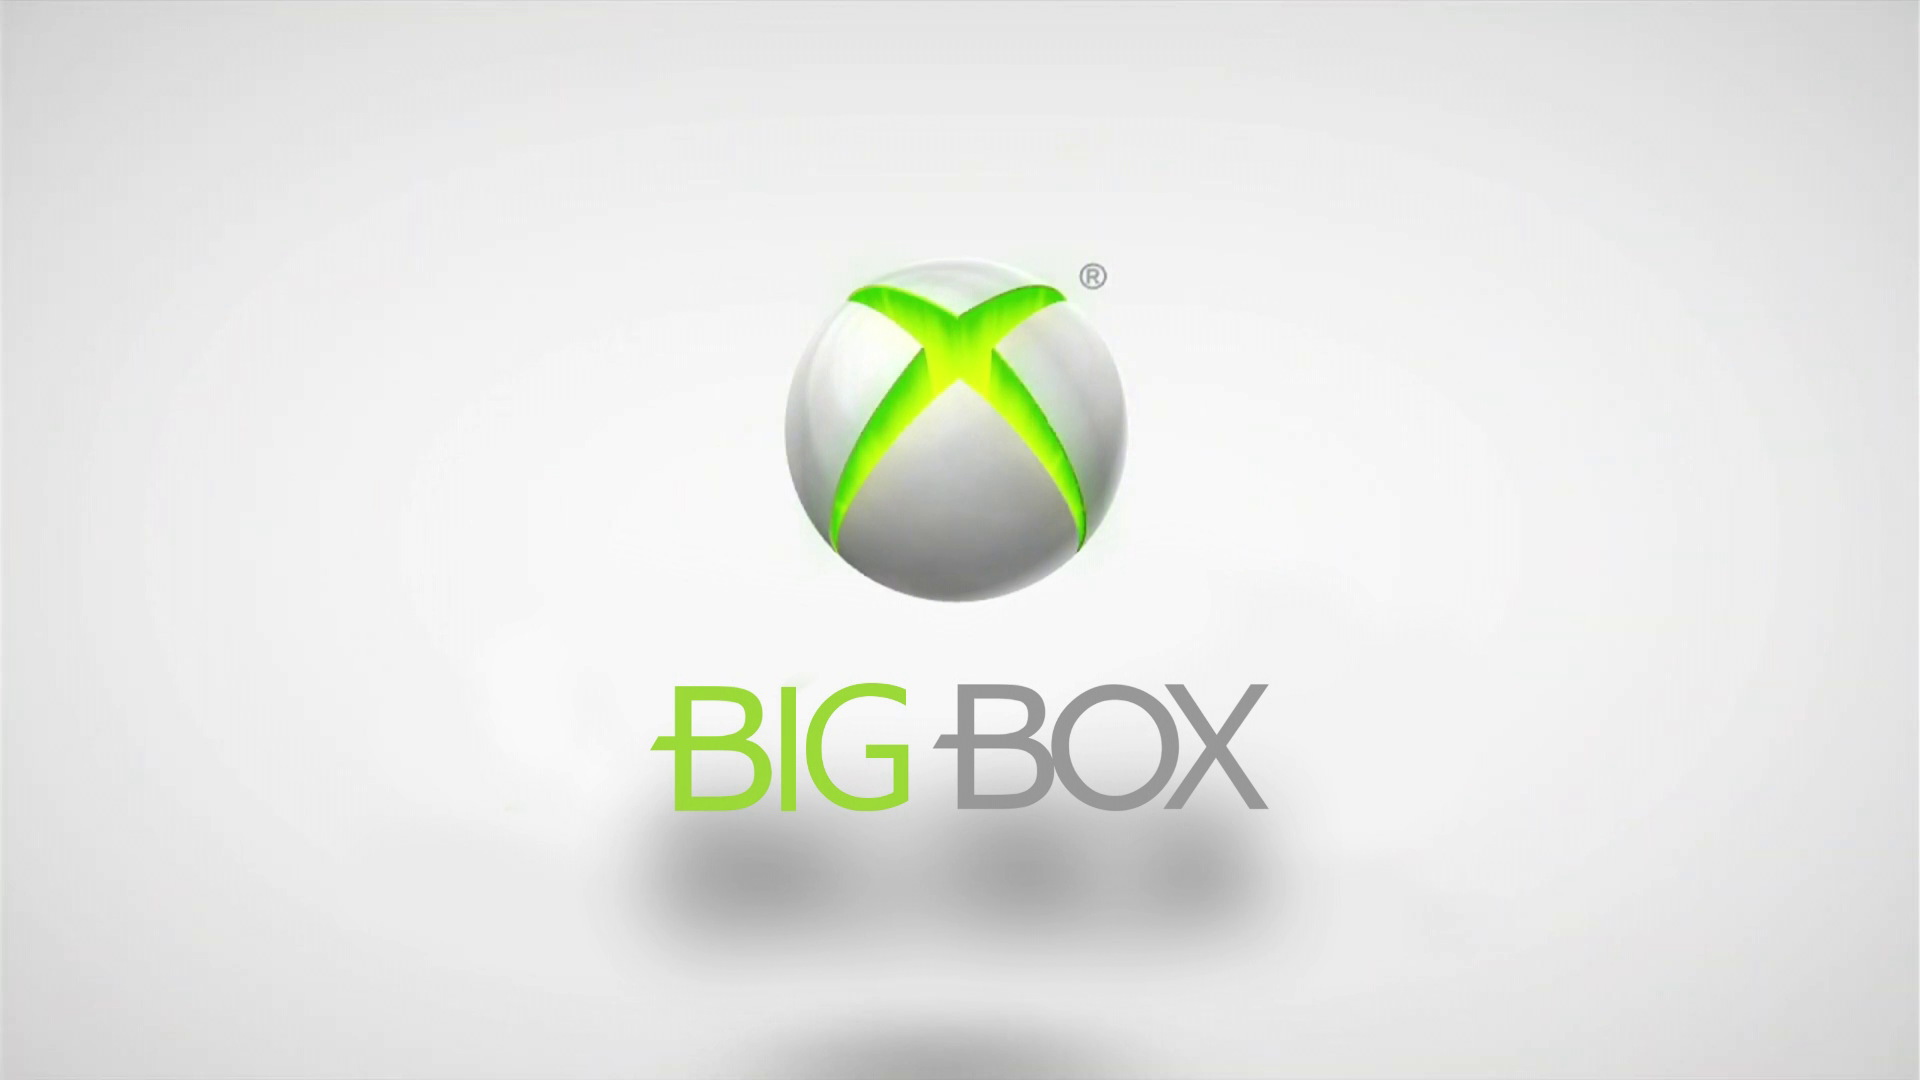 More information about "BigBox 360"